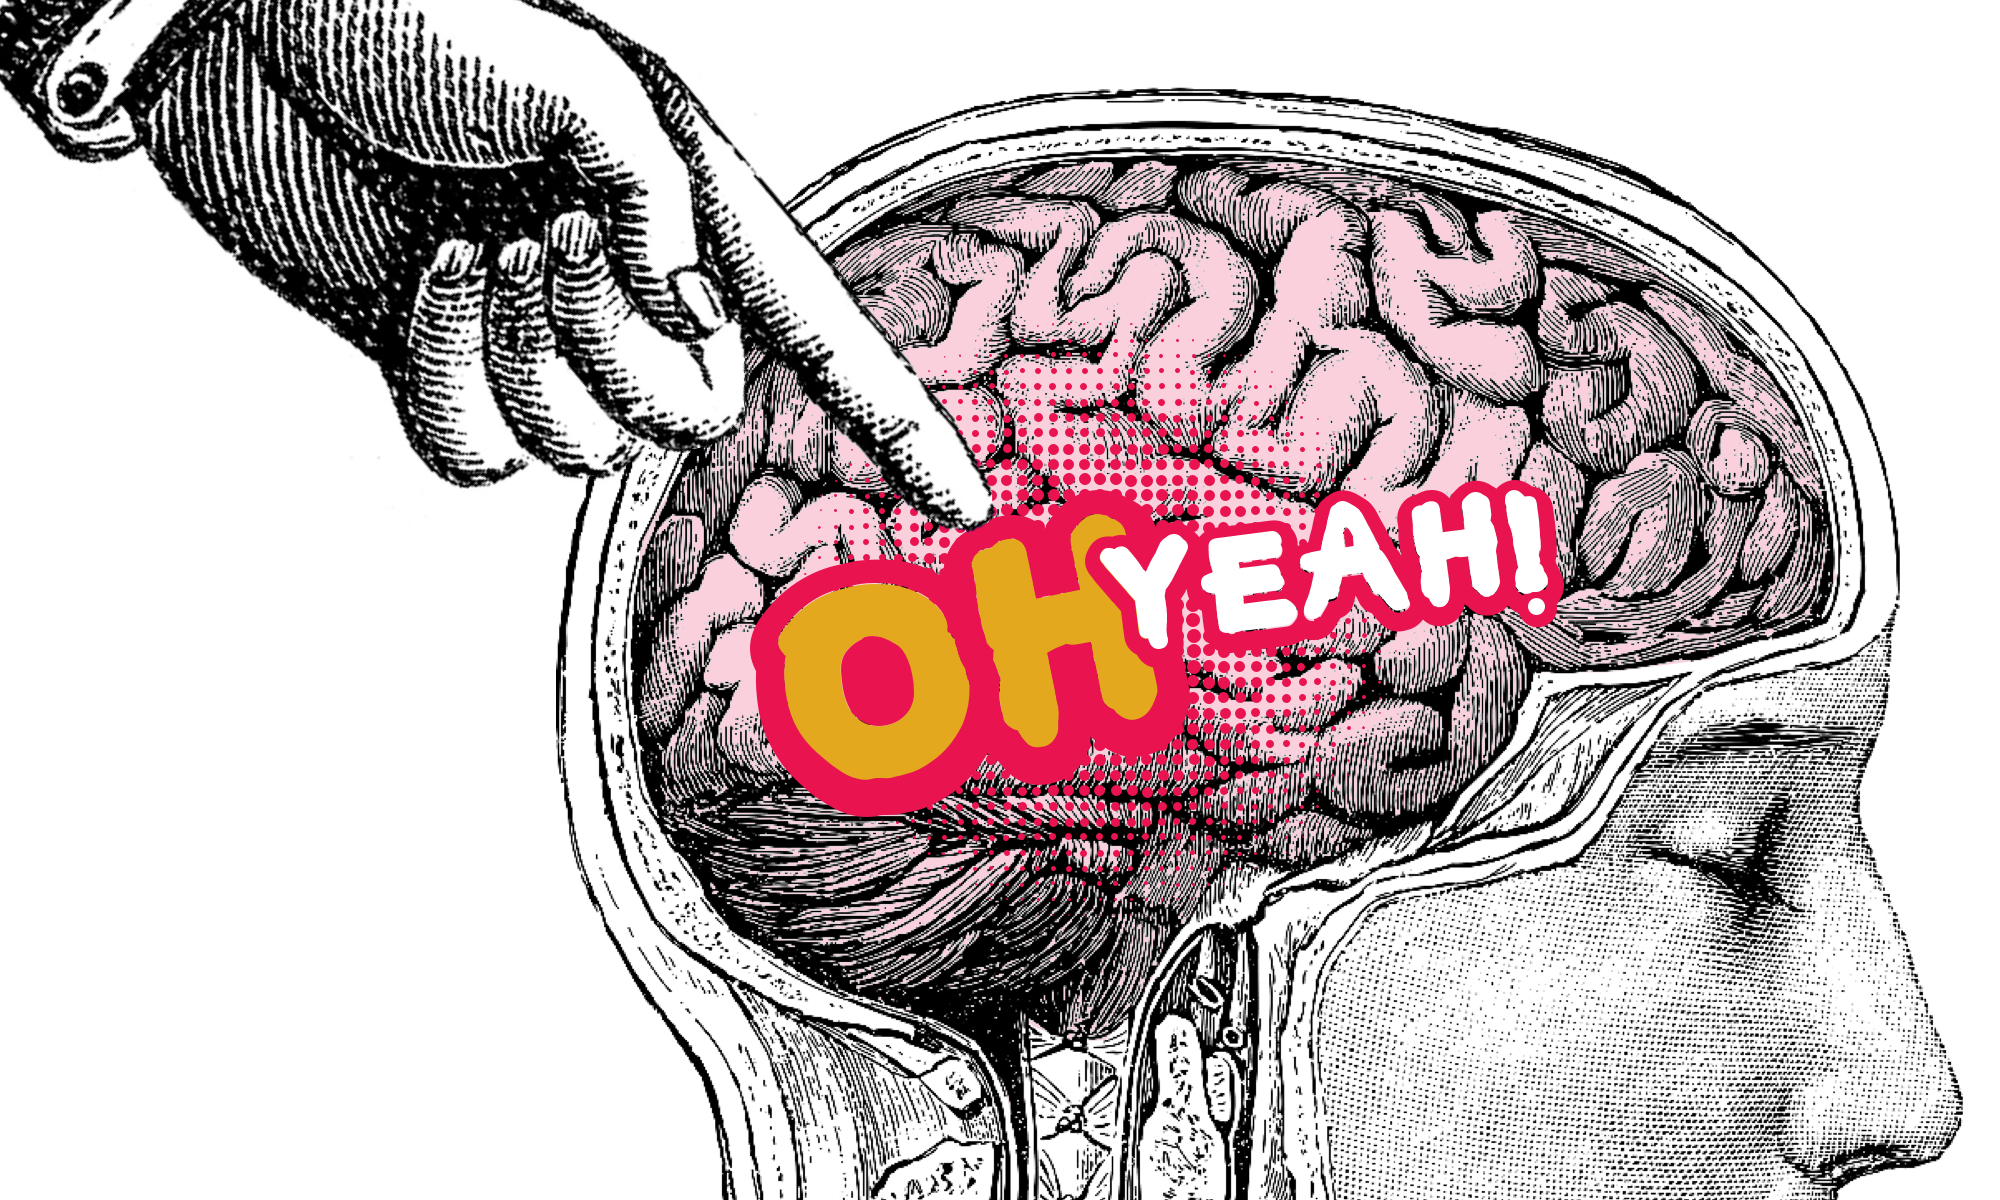 A vintage medical illustration of the brain in a human head, with a finger poking it, and a very enthusiastic "OH YEAH!" overlaid.